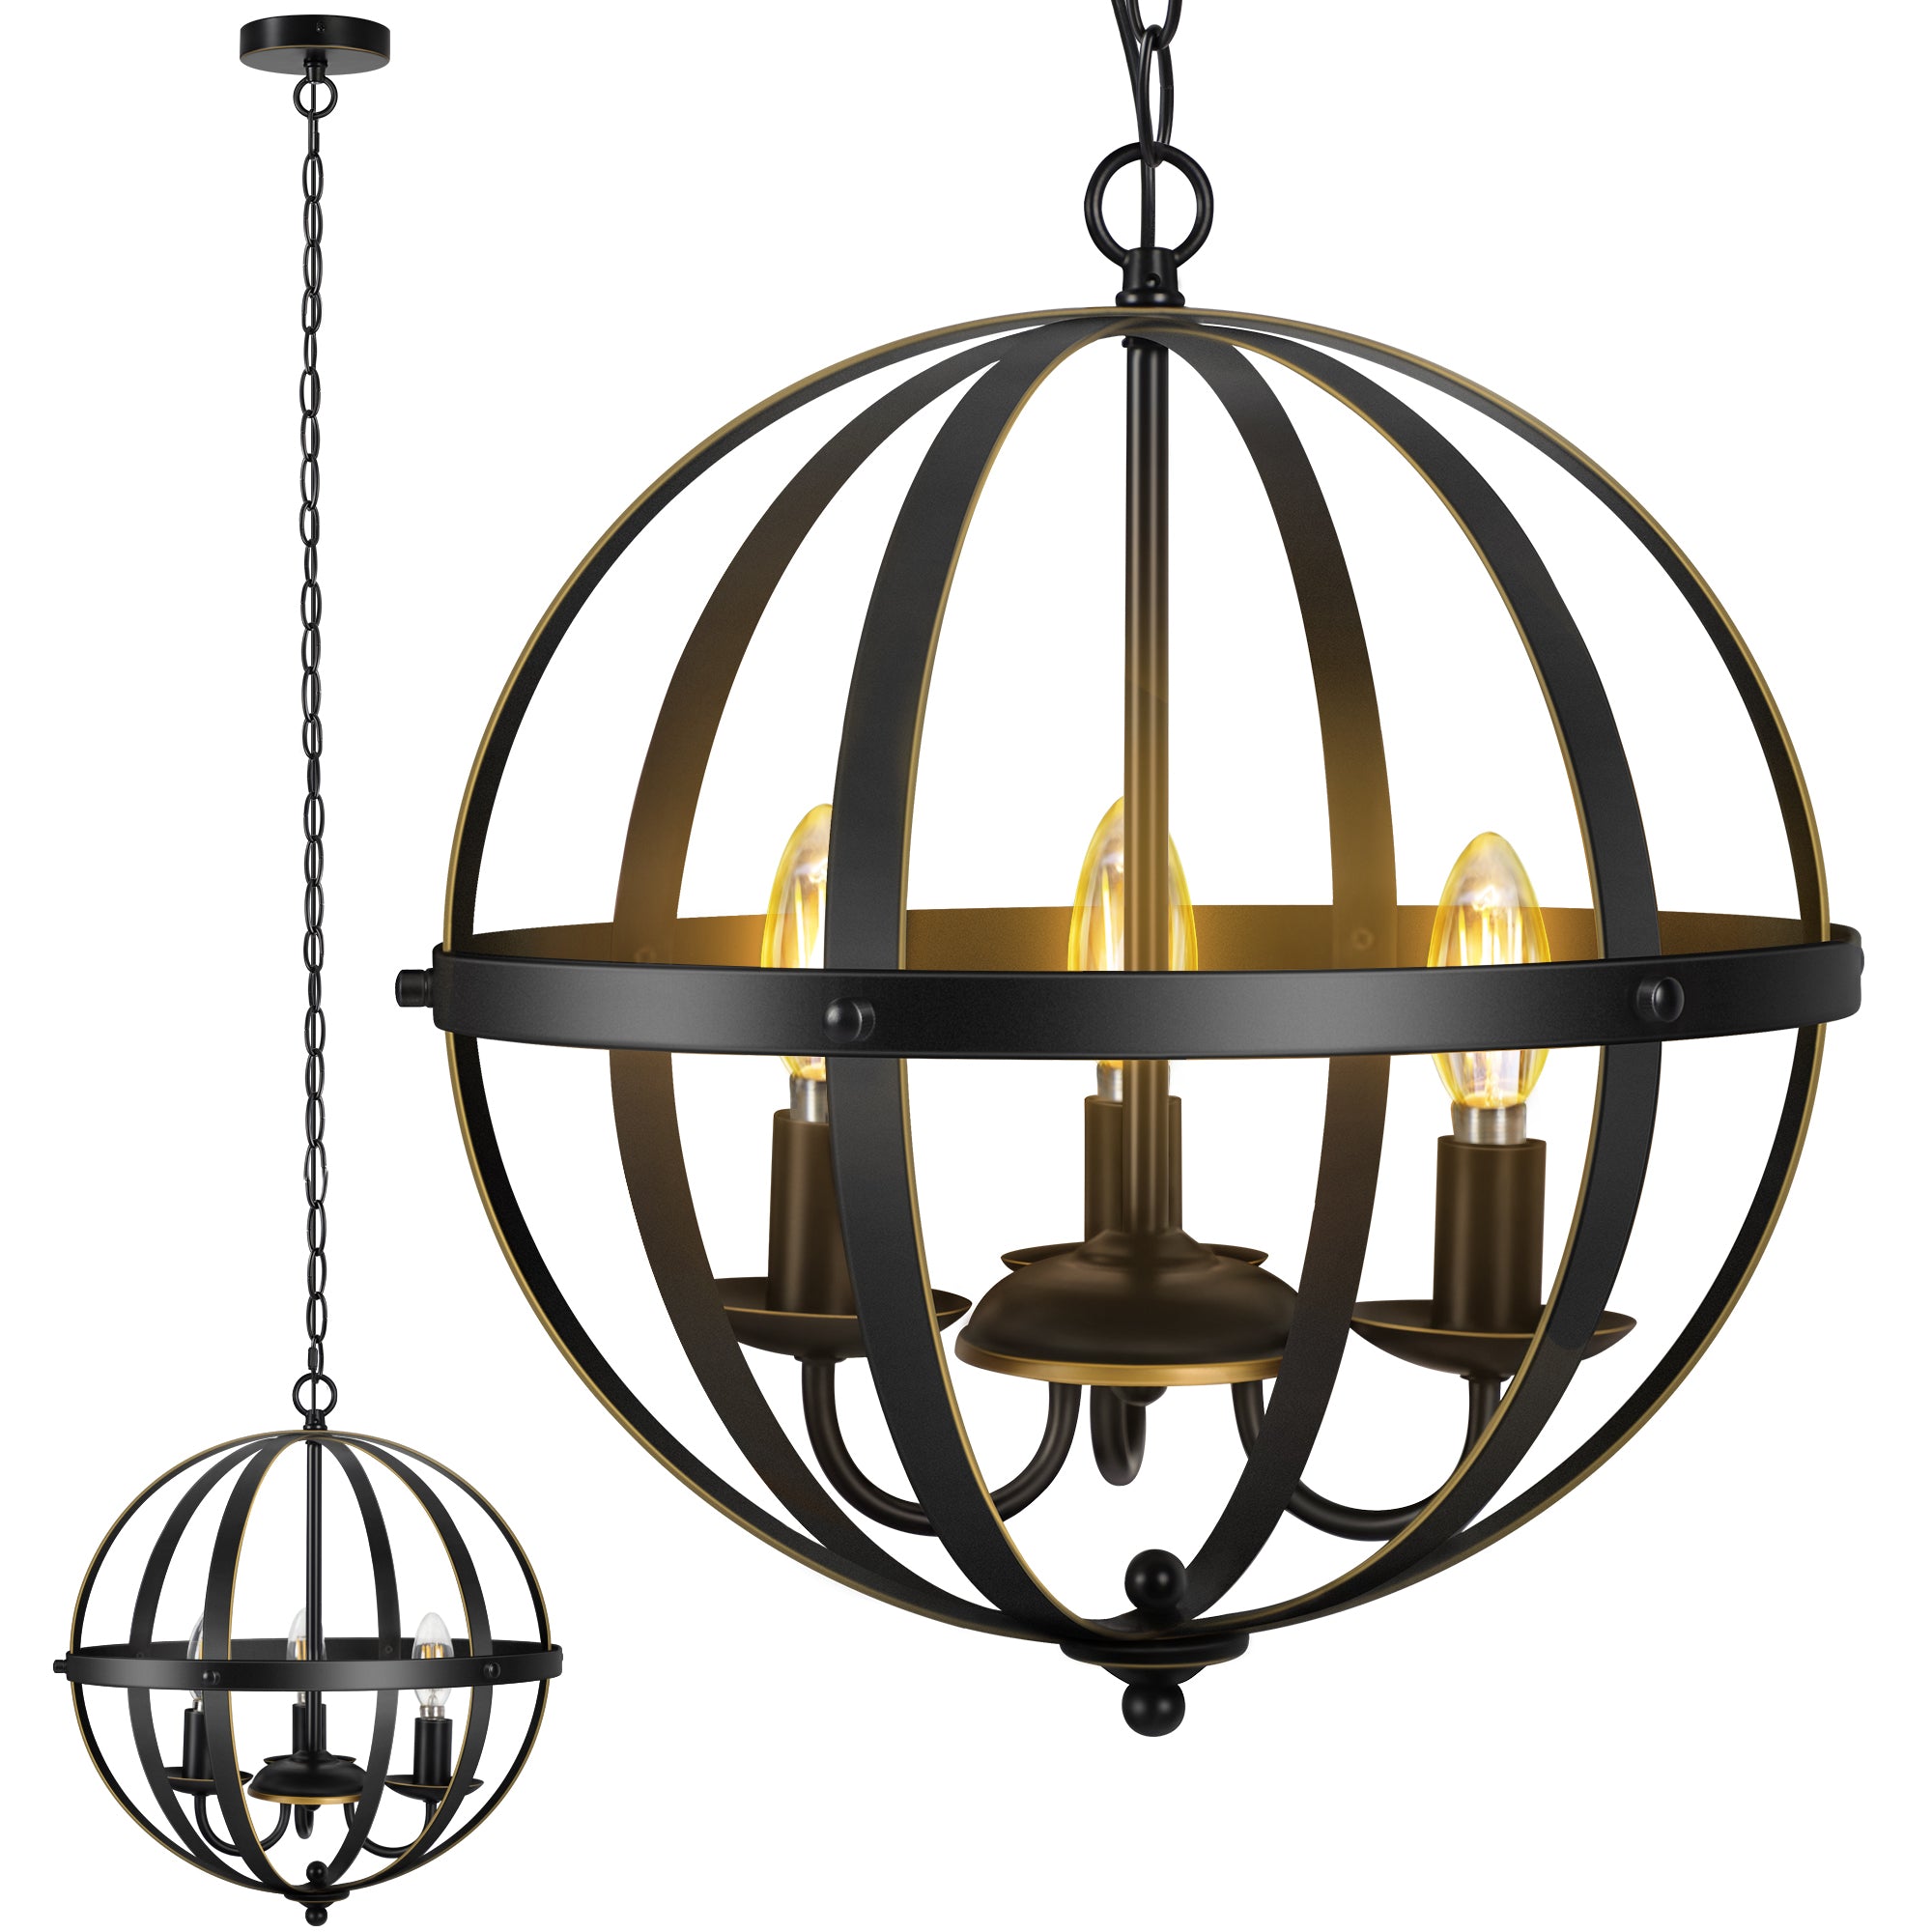 OUTON 3 Light Vintage Pendant Hanging Light with Metal Ring Design for Dining room Living room